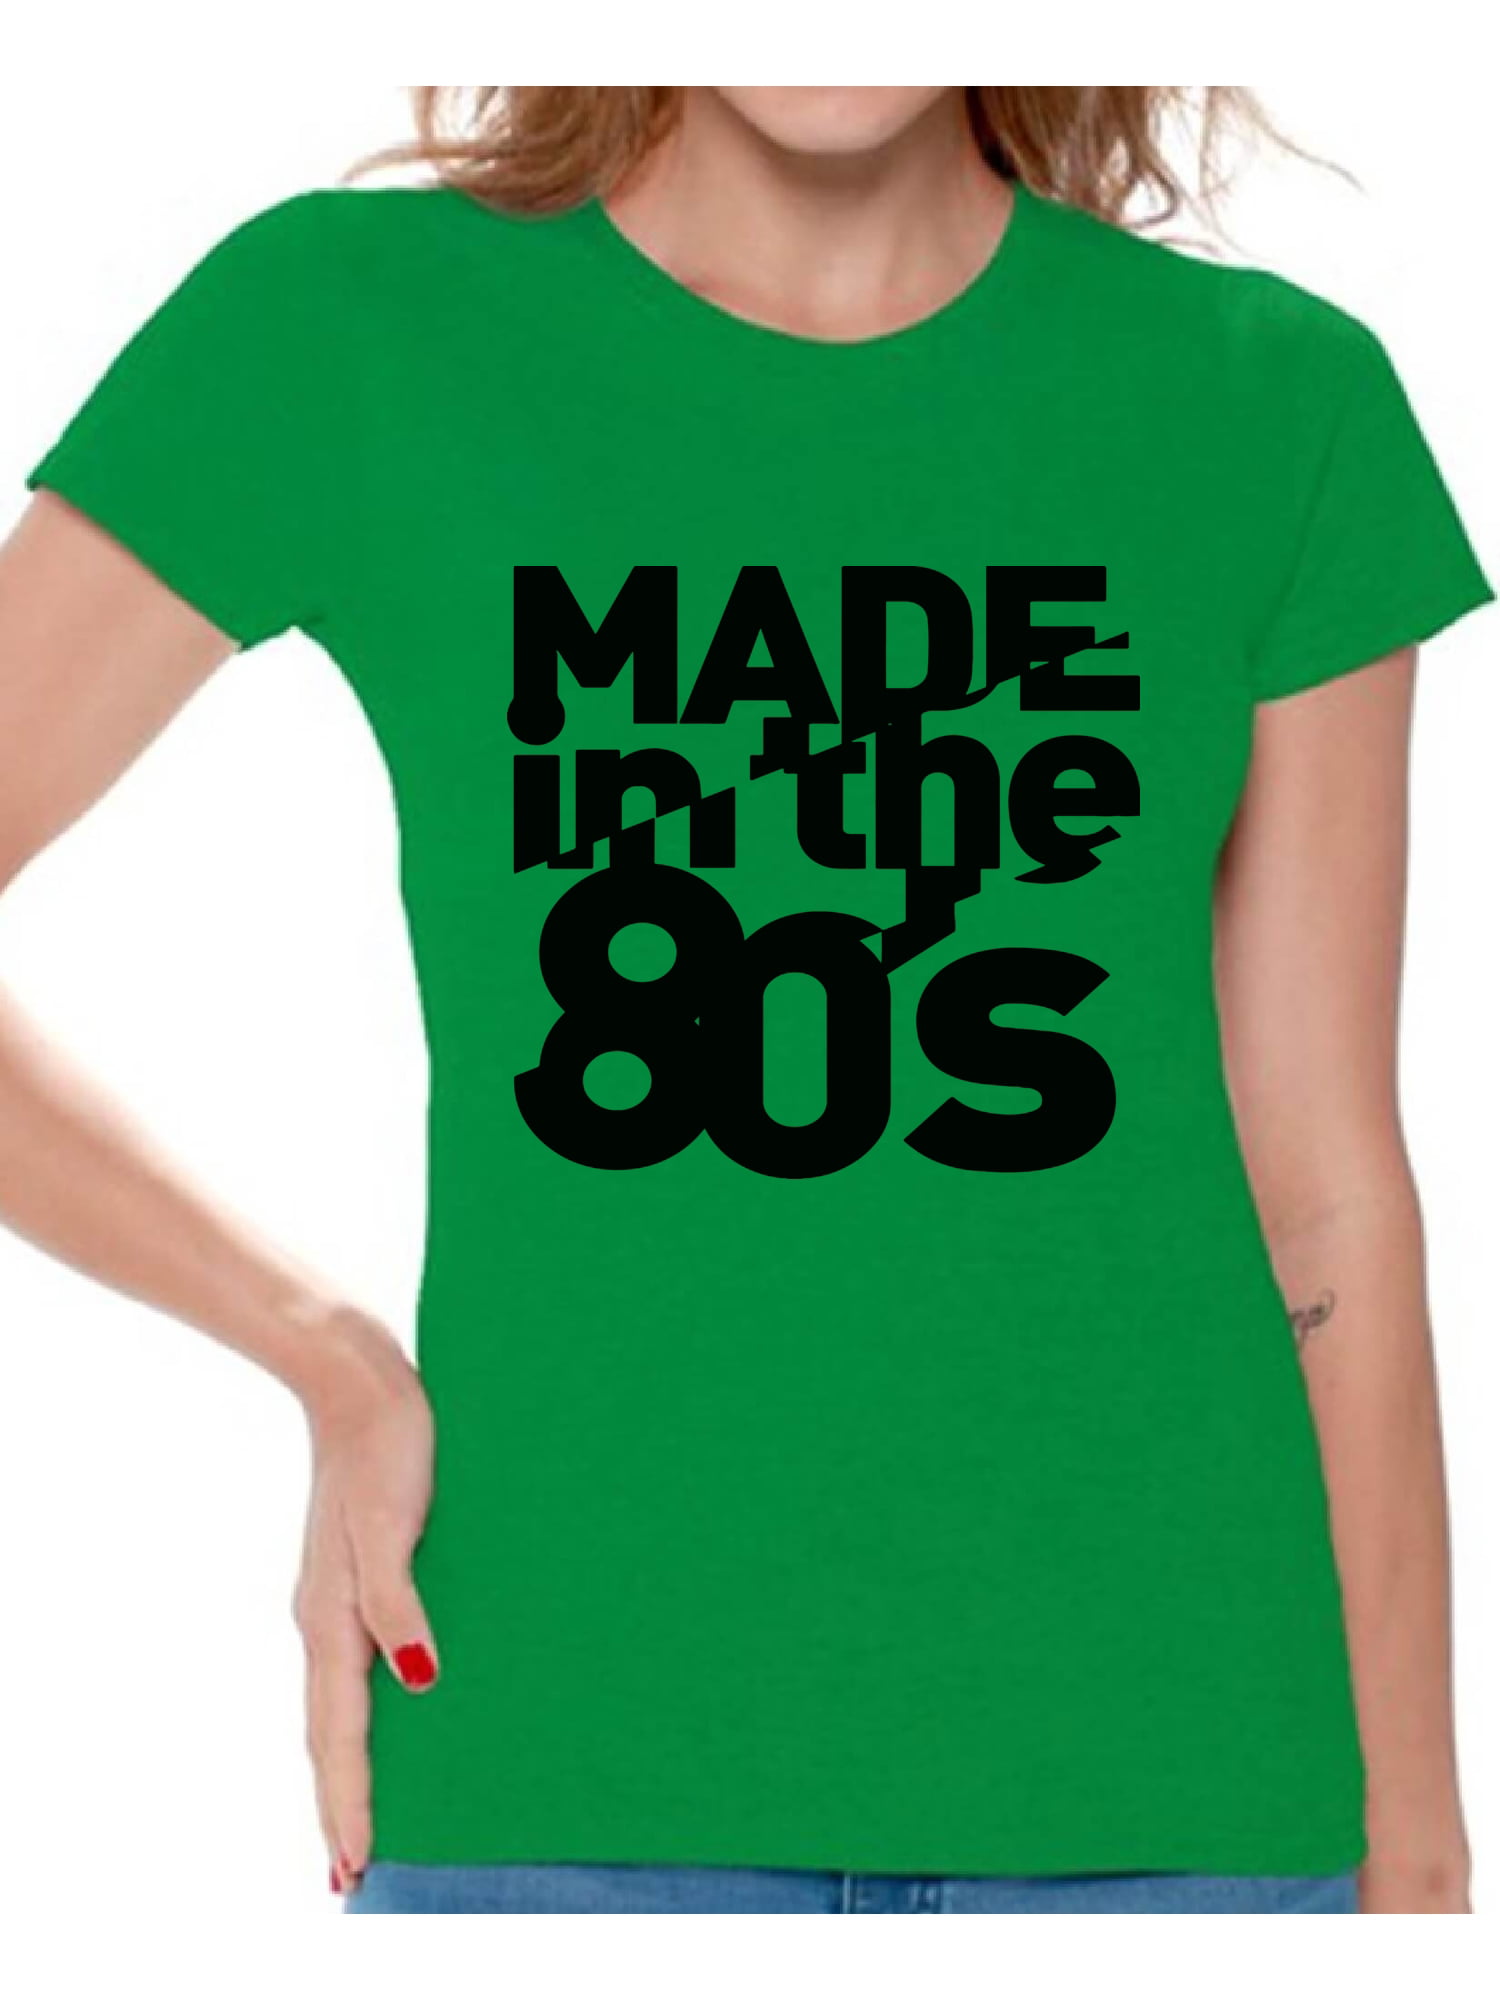 Awkward Styles Made in 80s Shirt 80s T Shirt 80s Birthday Shirt Mens 80s Accessories Retro Vintage Rock Concert T-Shirt 80s Costume 80s Clothes for